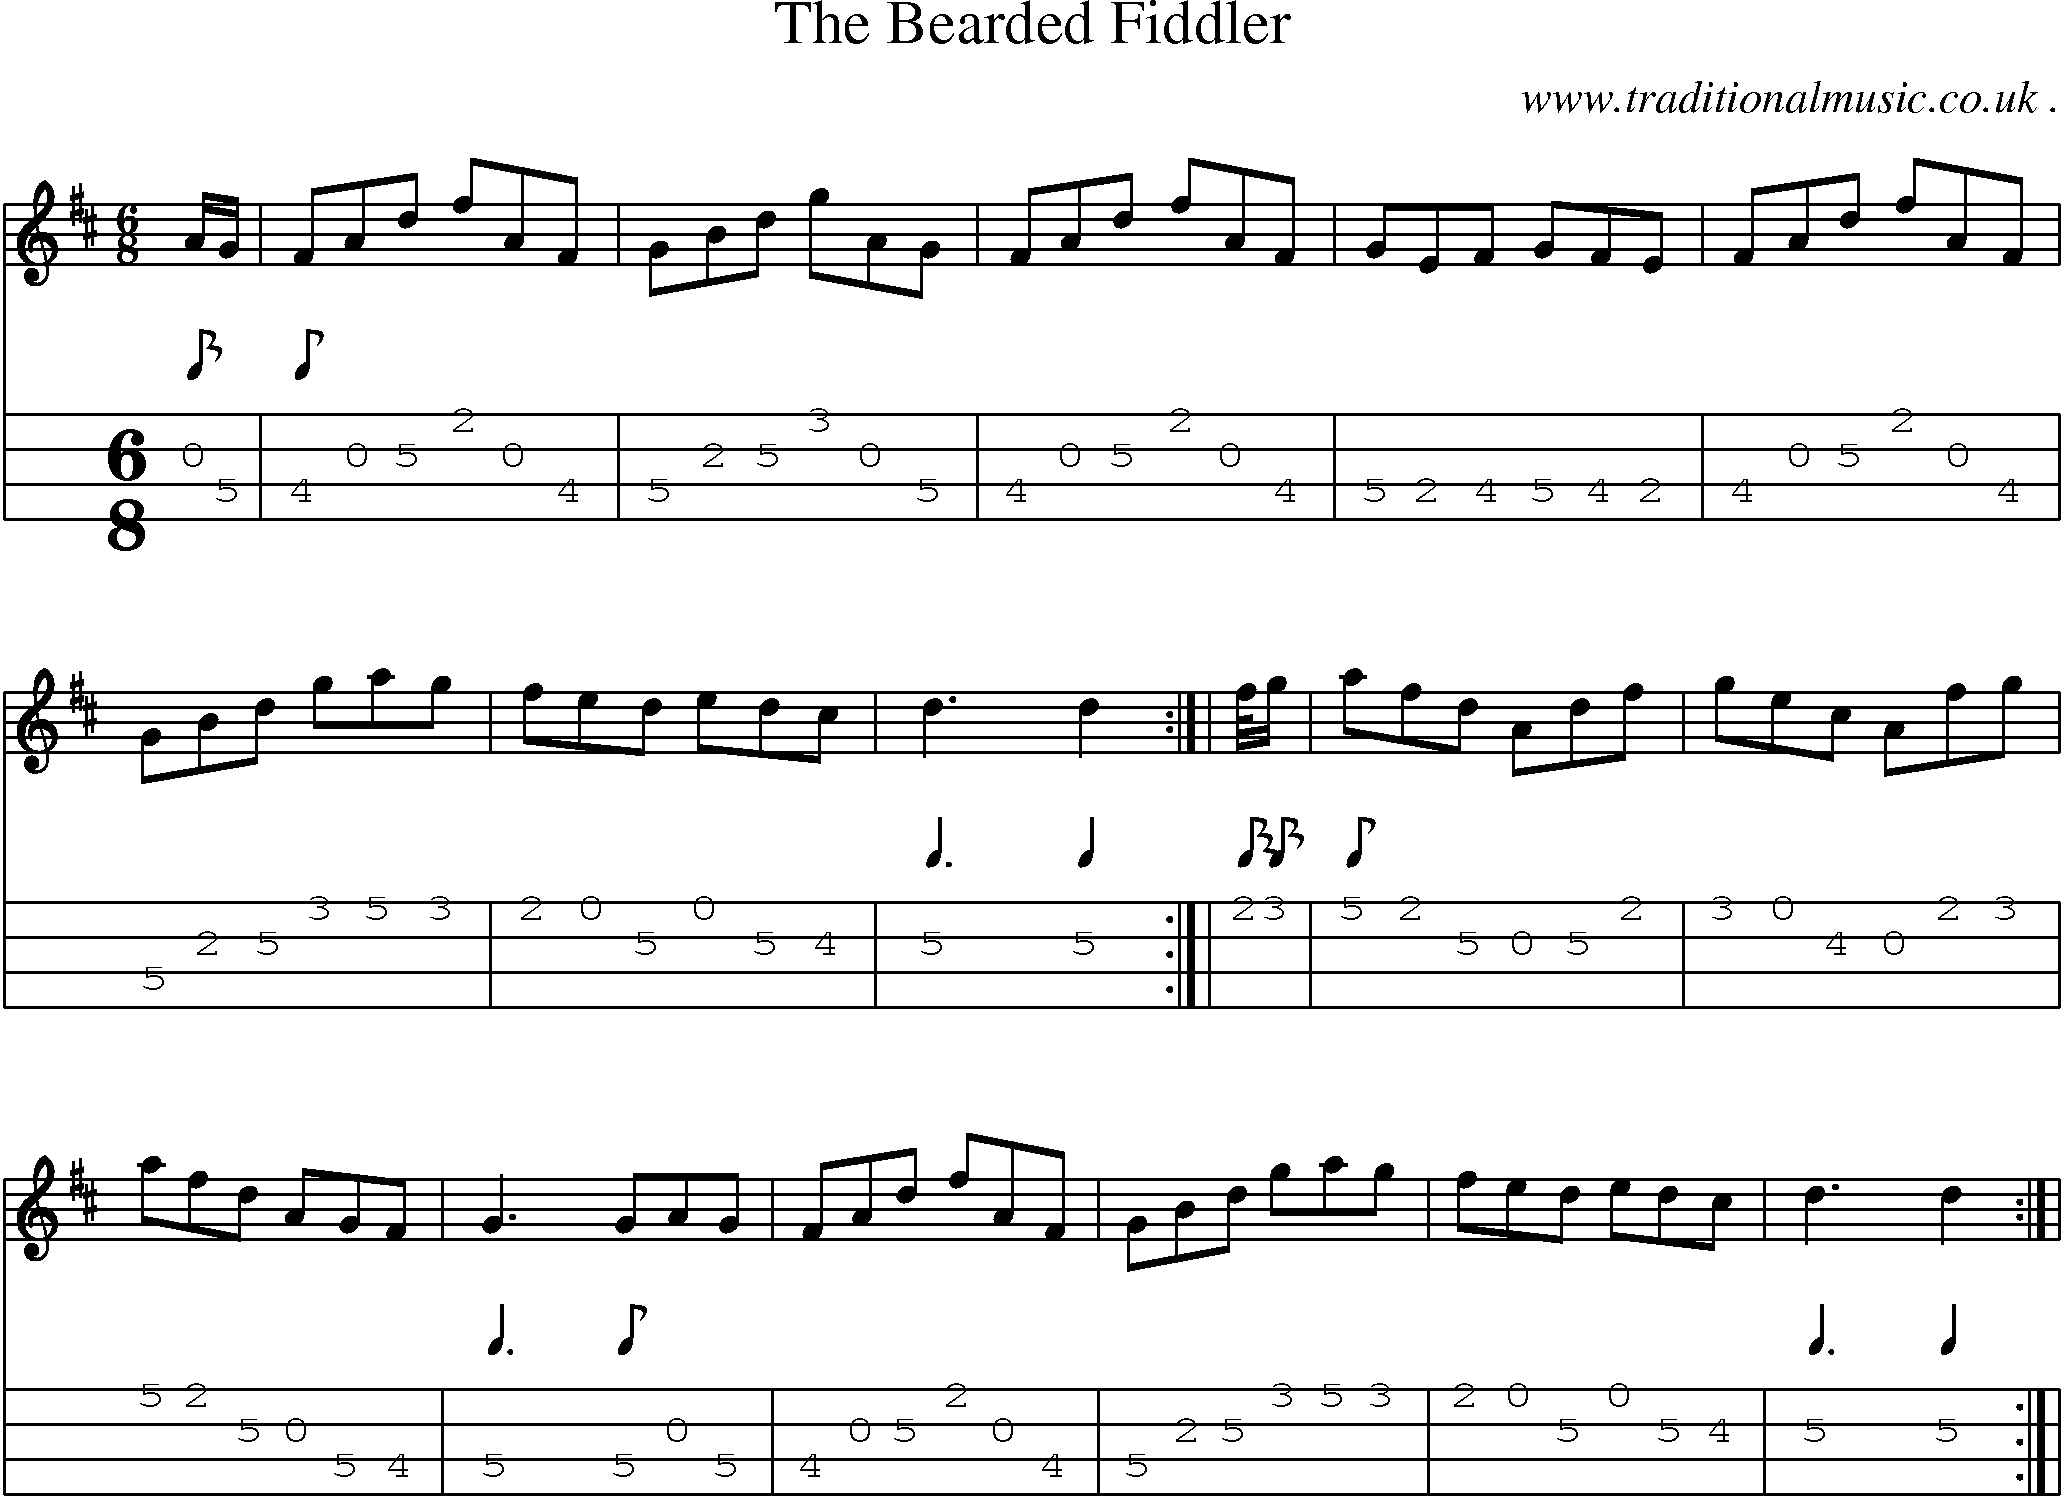 Sheet-Music and Mandolin Tabs for The Bearded Fiddler